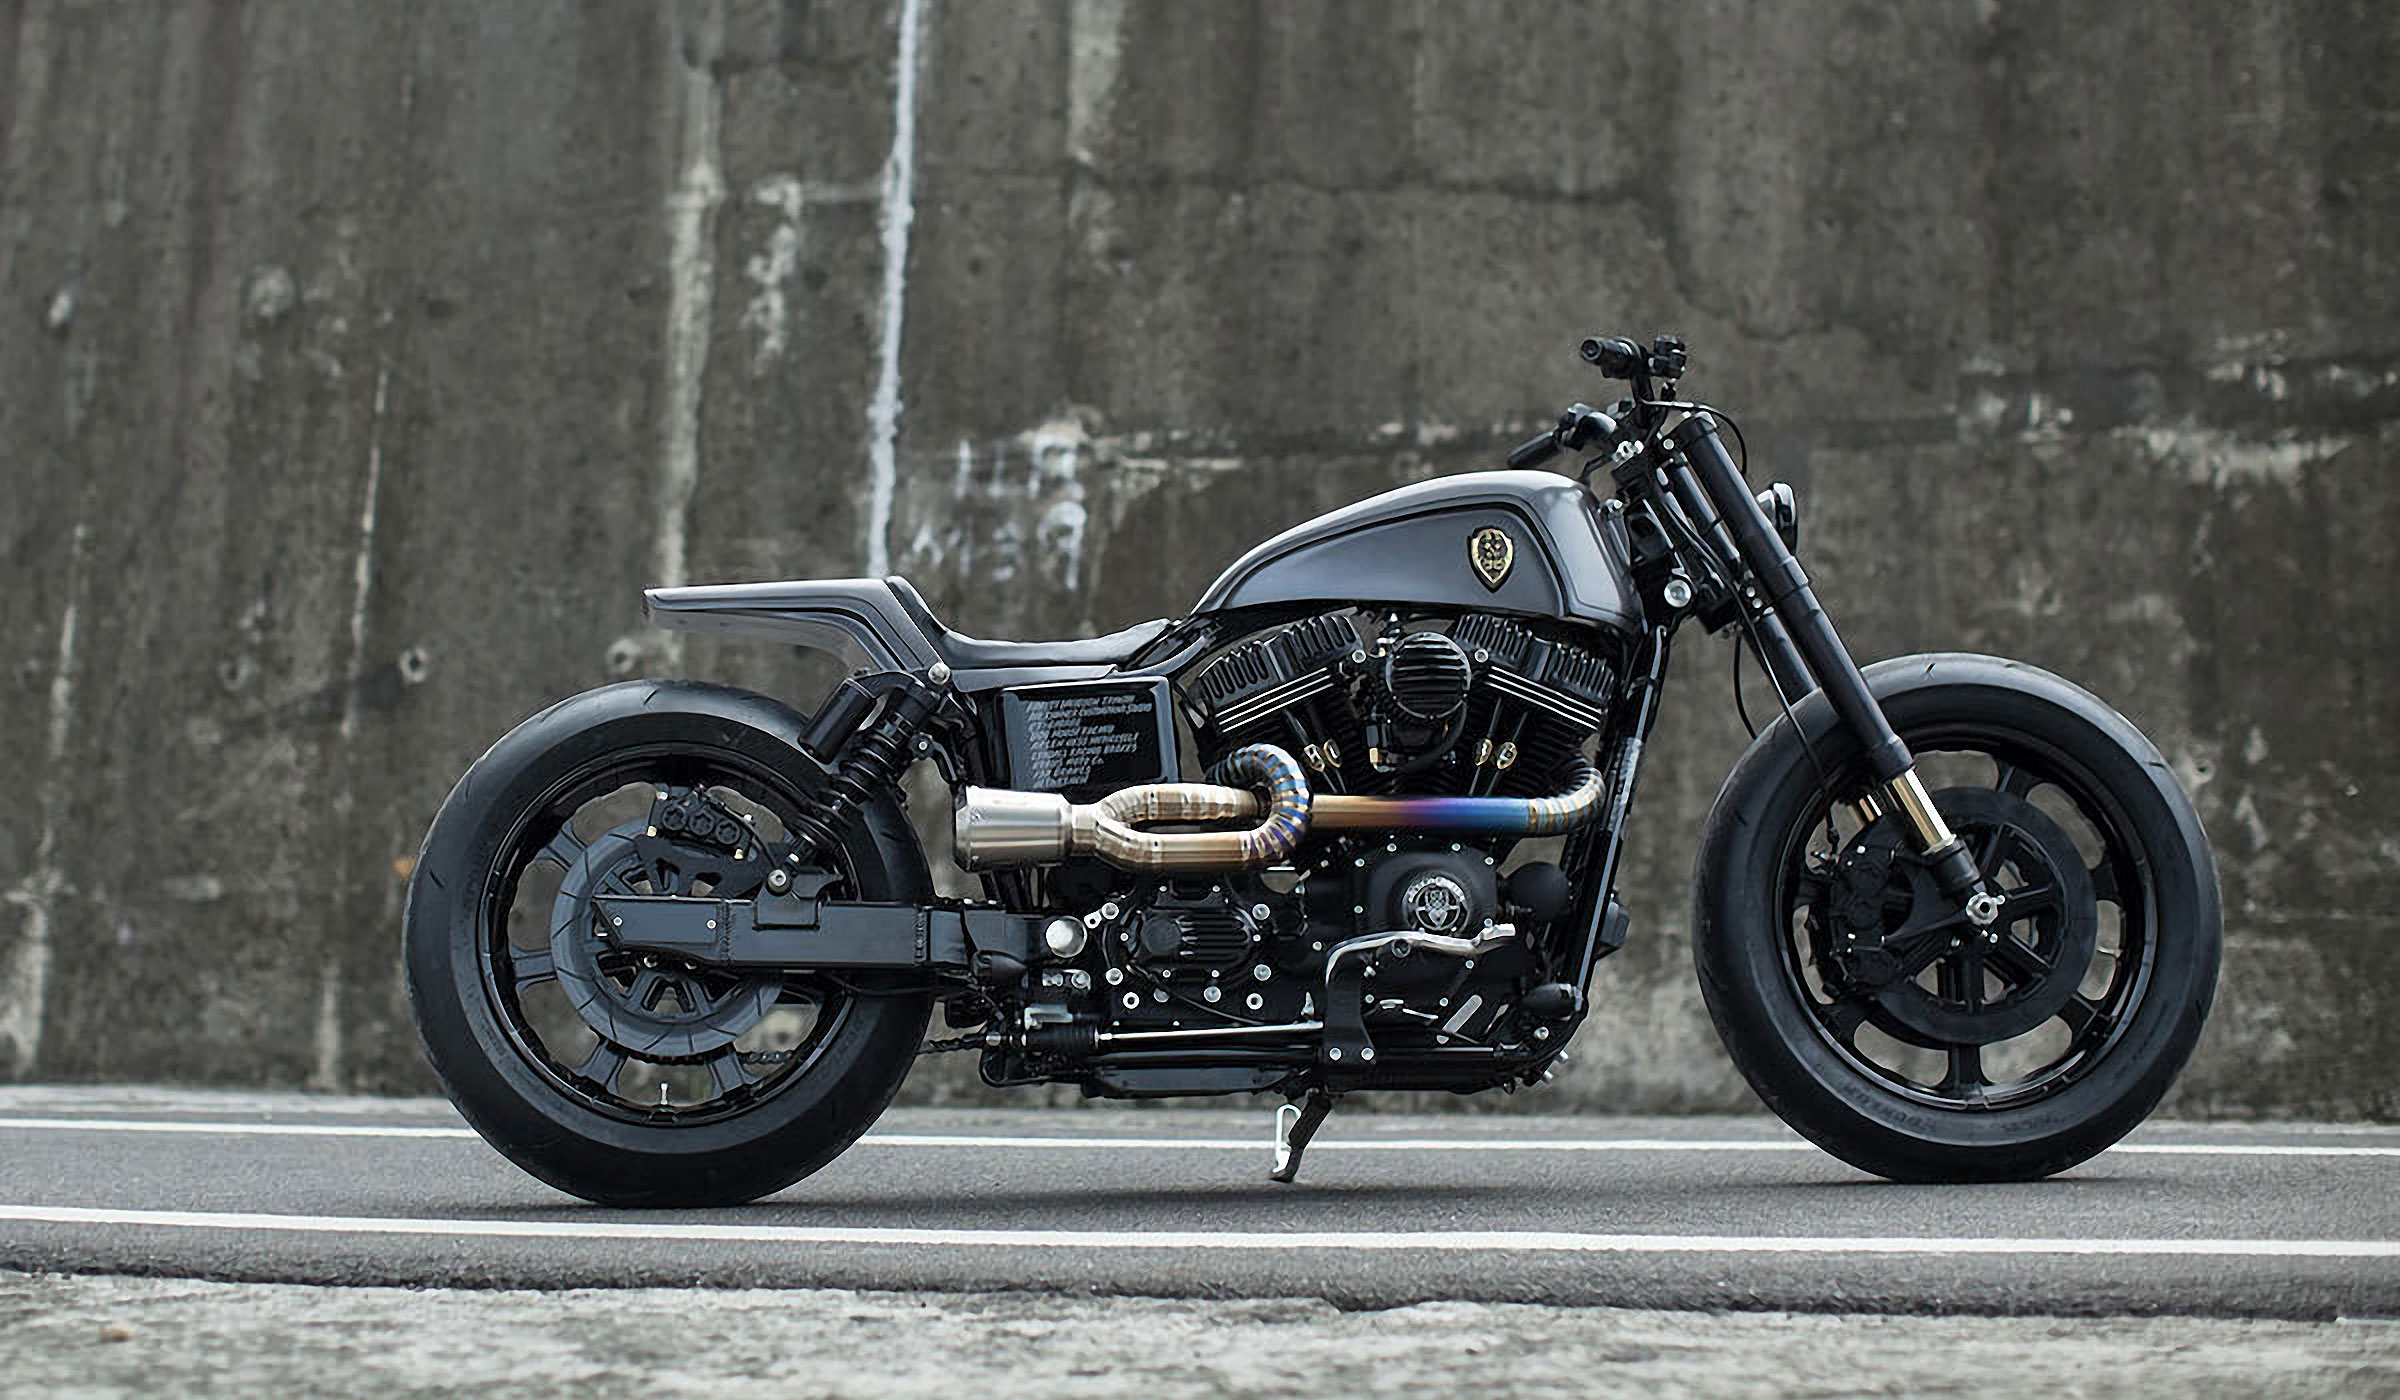 THE URBAN CAVALRY BY ROUGH CRAFTS